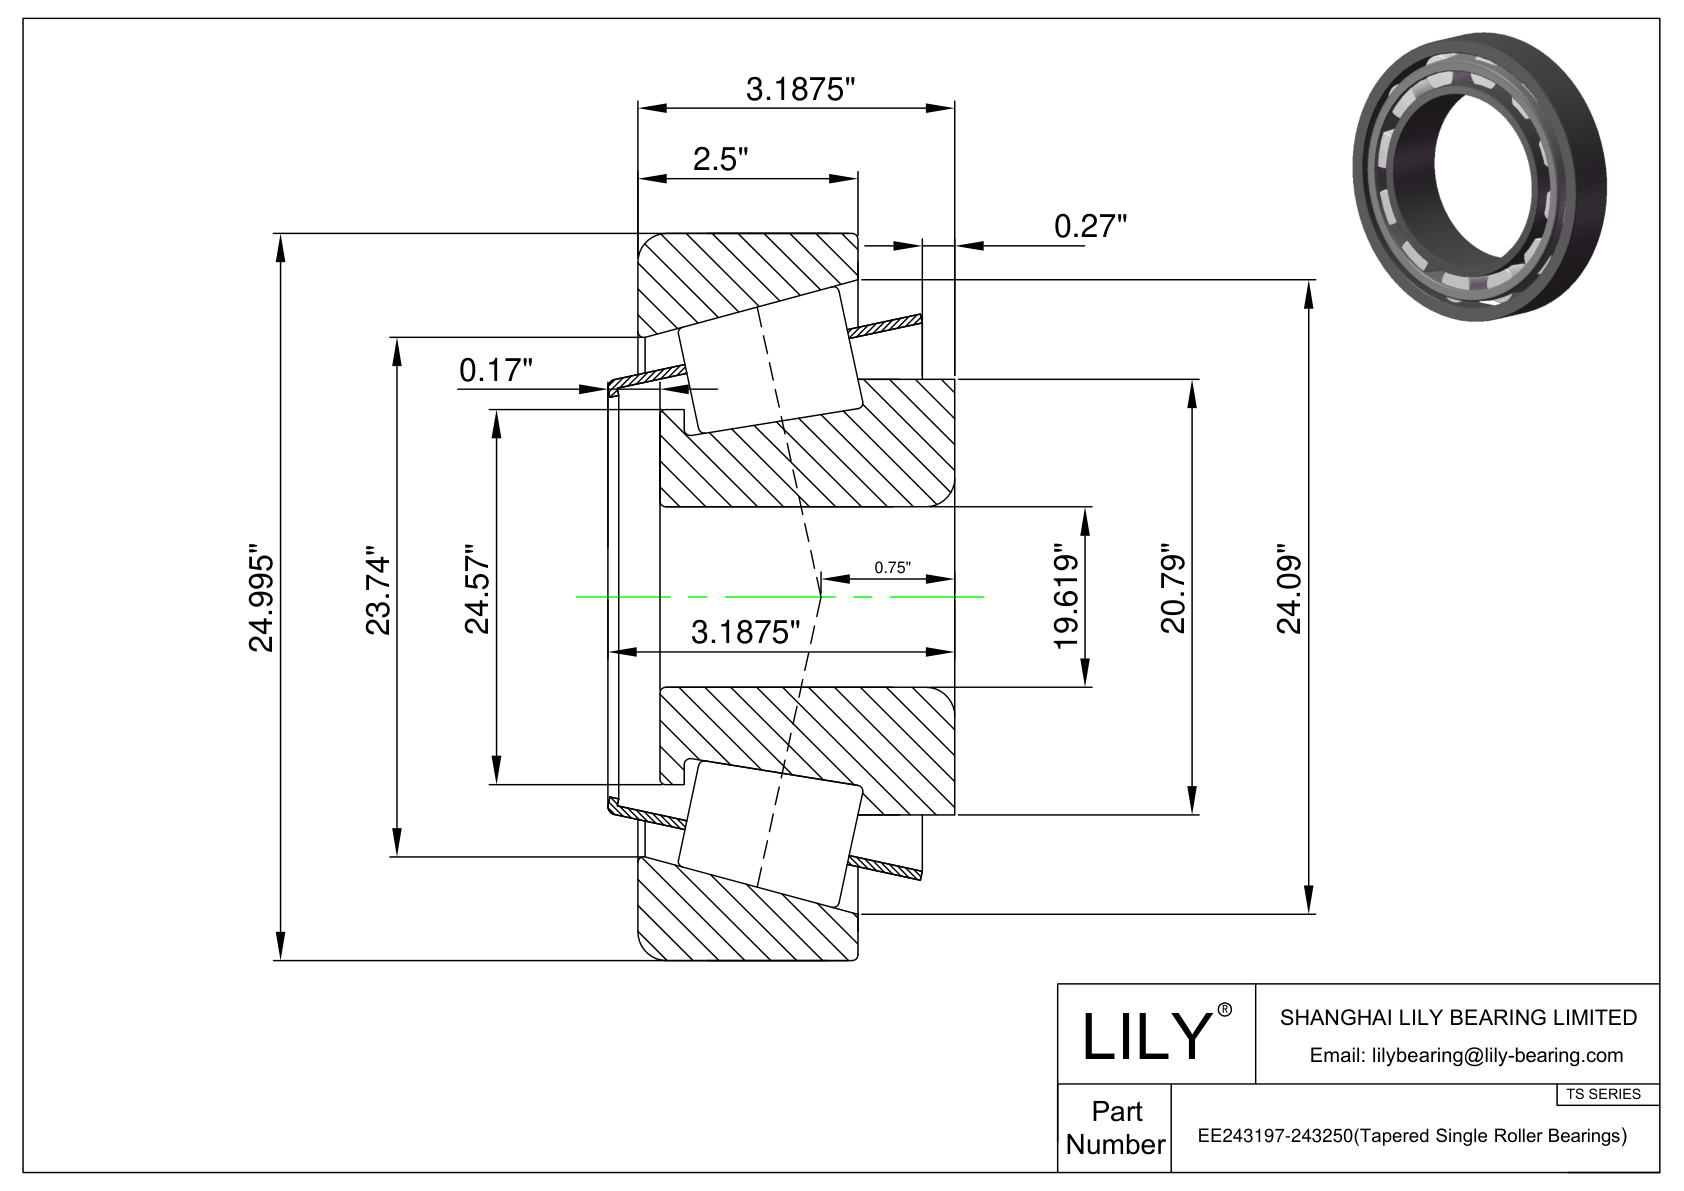 EE243197-243250 TS (Tapered Single Roller Bearings) (Imperial) cad drawing